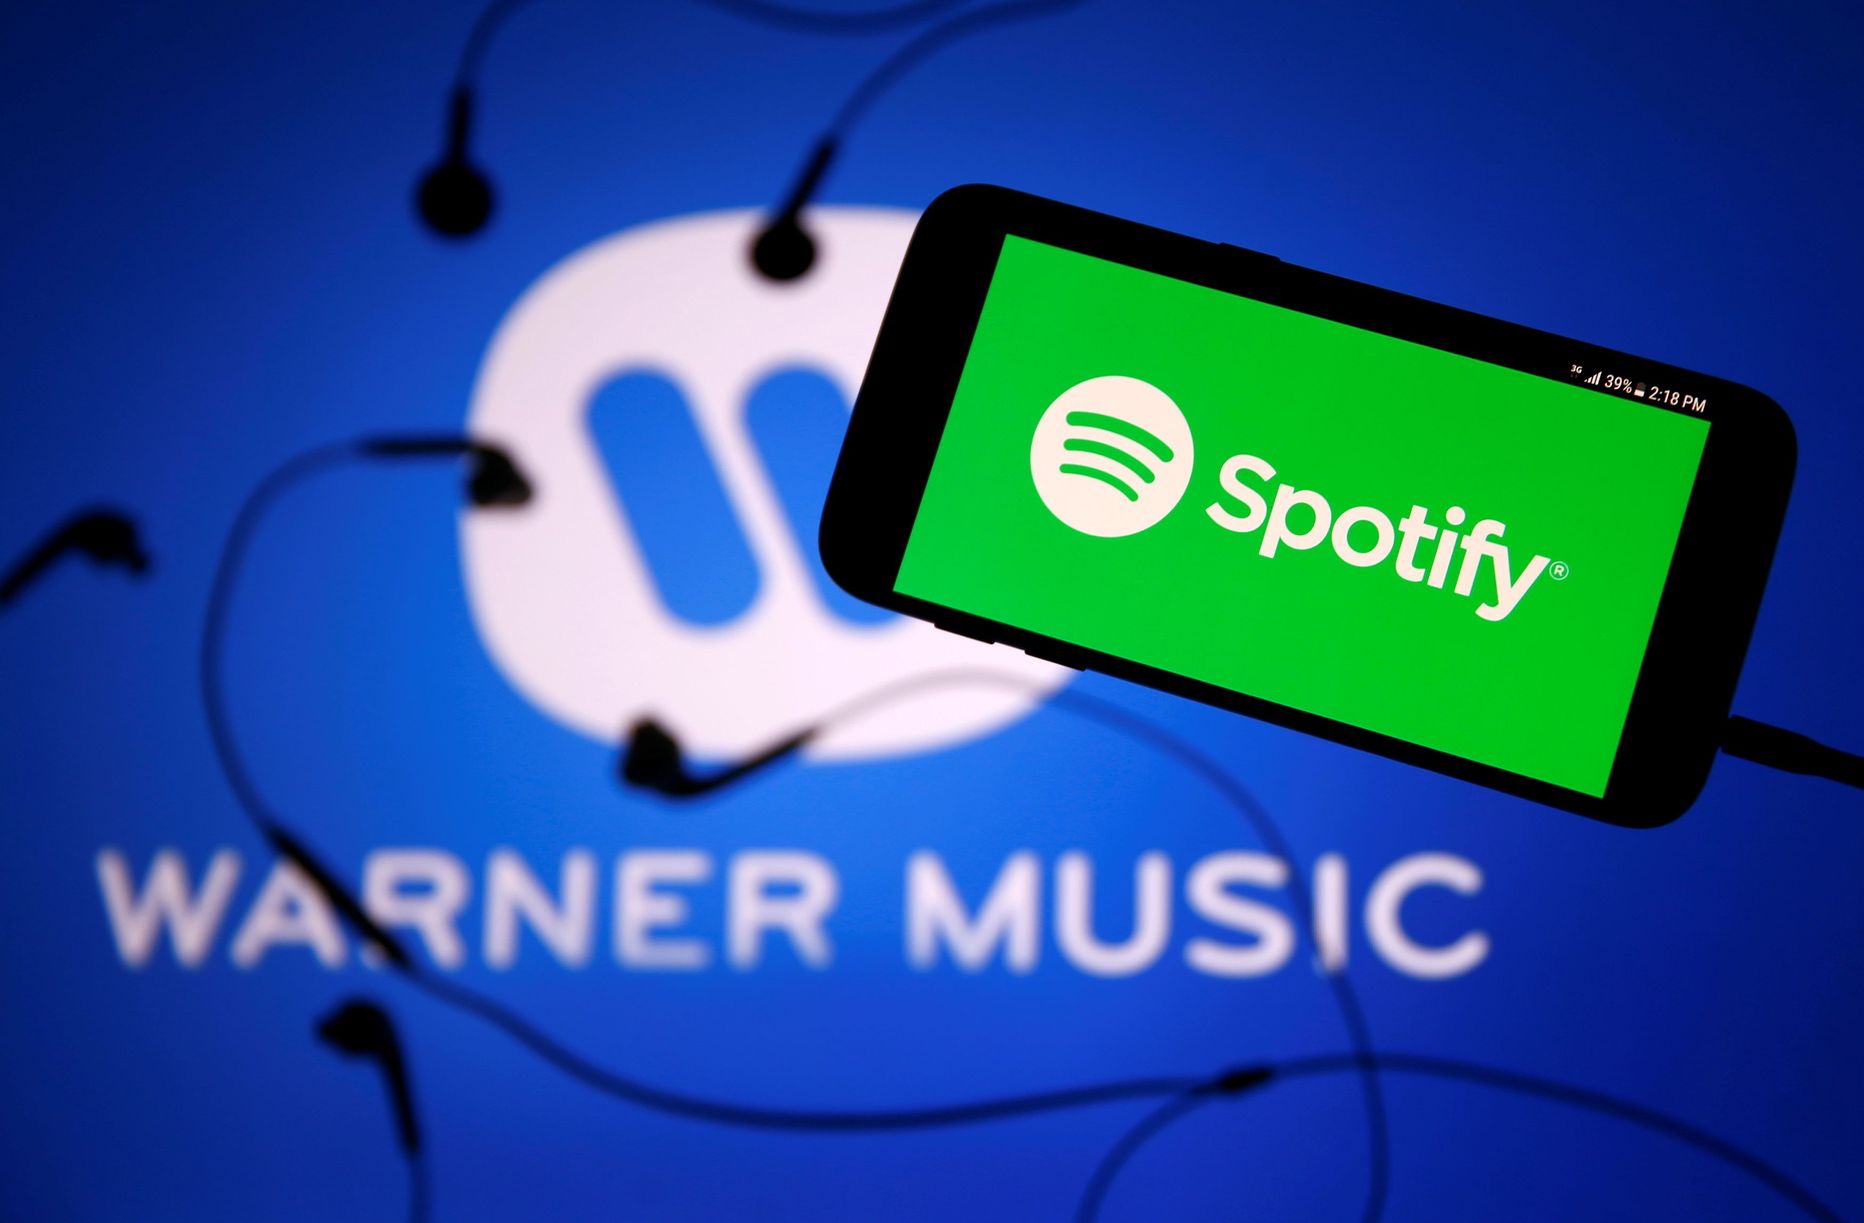 A smartphone with a headset with Spotify logo are seen in front of a displayed Warner Music logo in this illustration picture taken July 24, 2017. REUTERS/Dado Ruvic